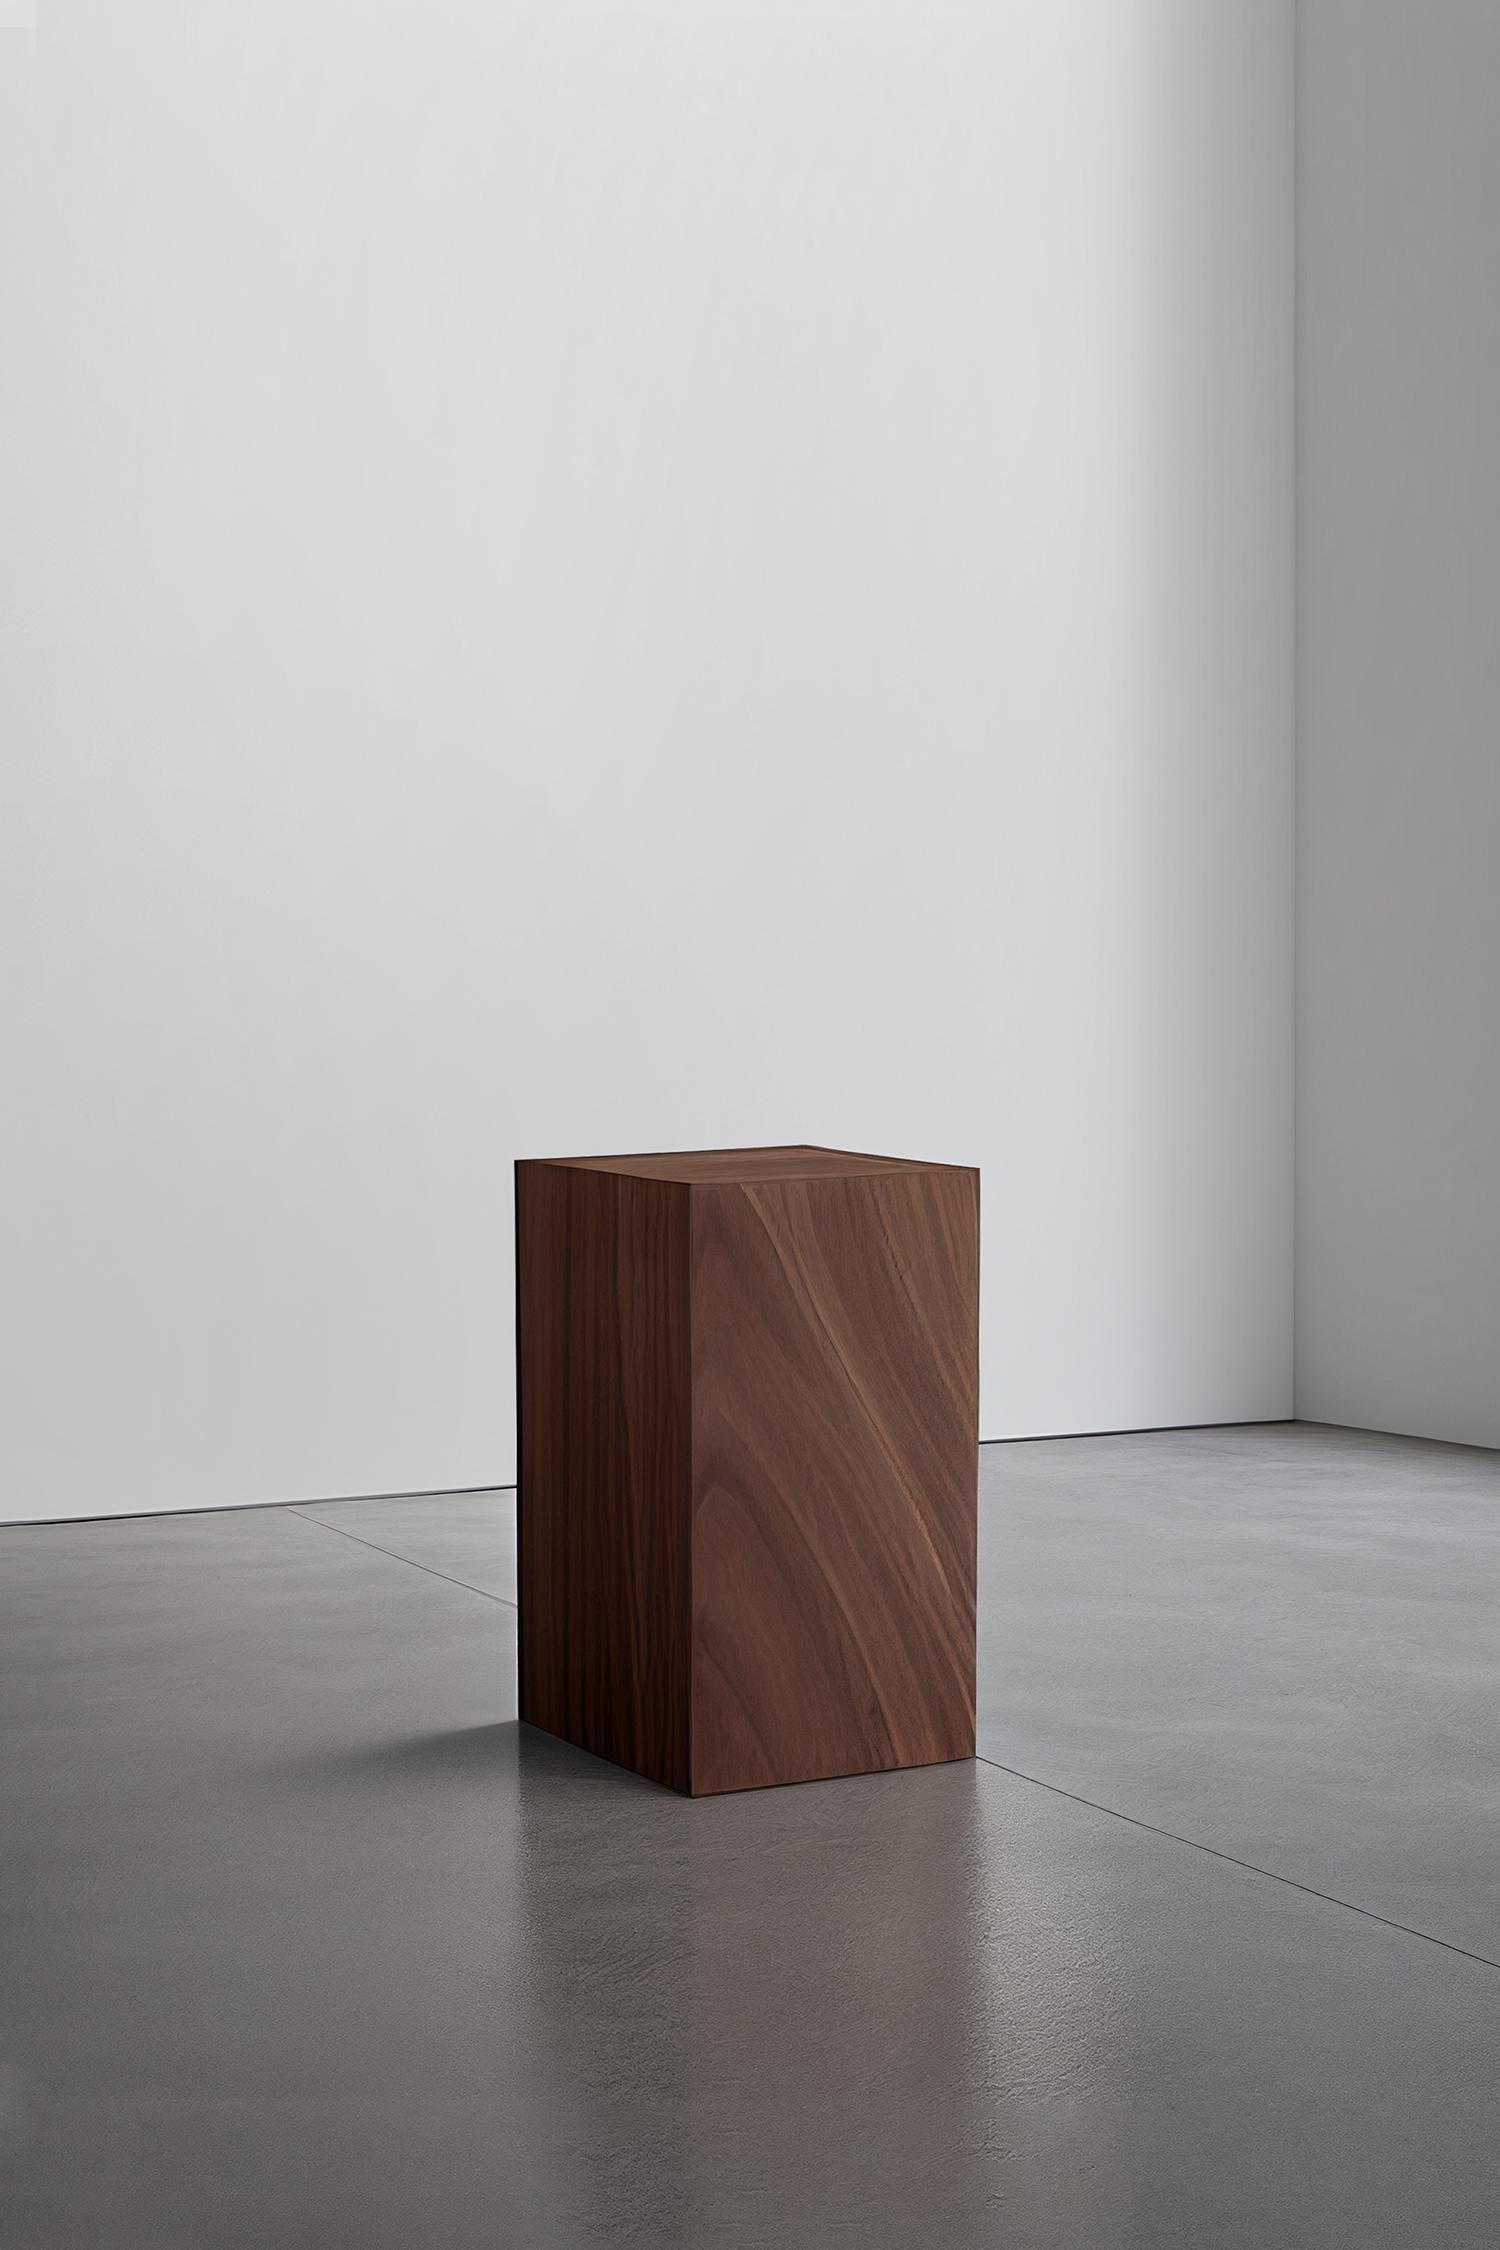 The Basa Plinths, designed by the NONO design team, are a monolithic masterpiece. The natural American sourced wood veneer sings with warm tones that blend seamlessly with the space. Each piece is unique, with its own set of veins, patterns, and